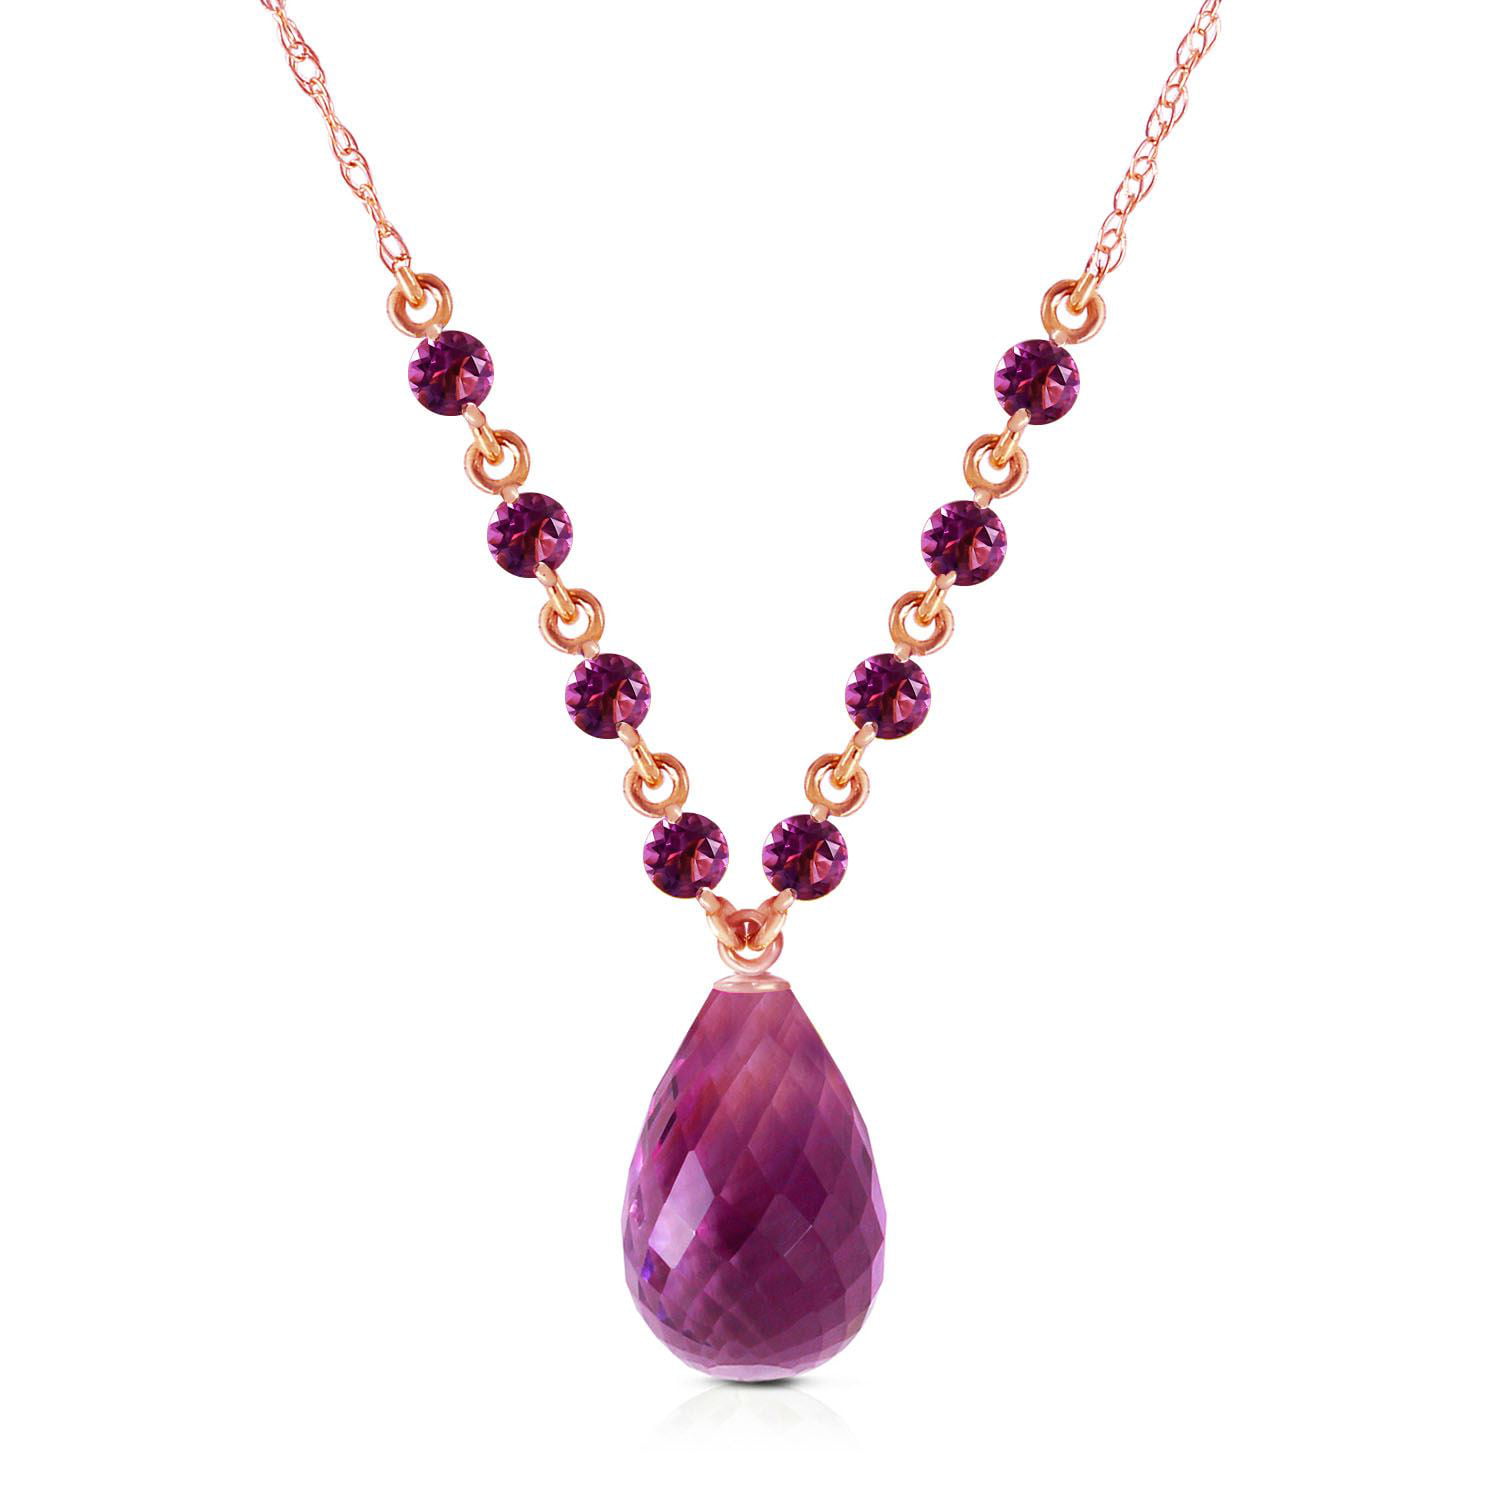 ALARRI 14K Solid Rose Gold Necklace w/ Natural Checkerboard Cut Purple Amethyst with 18 Inch Chain Length